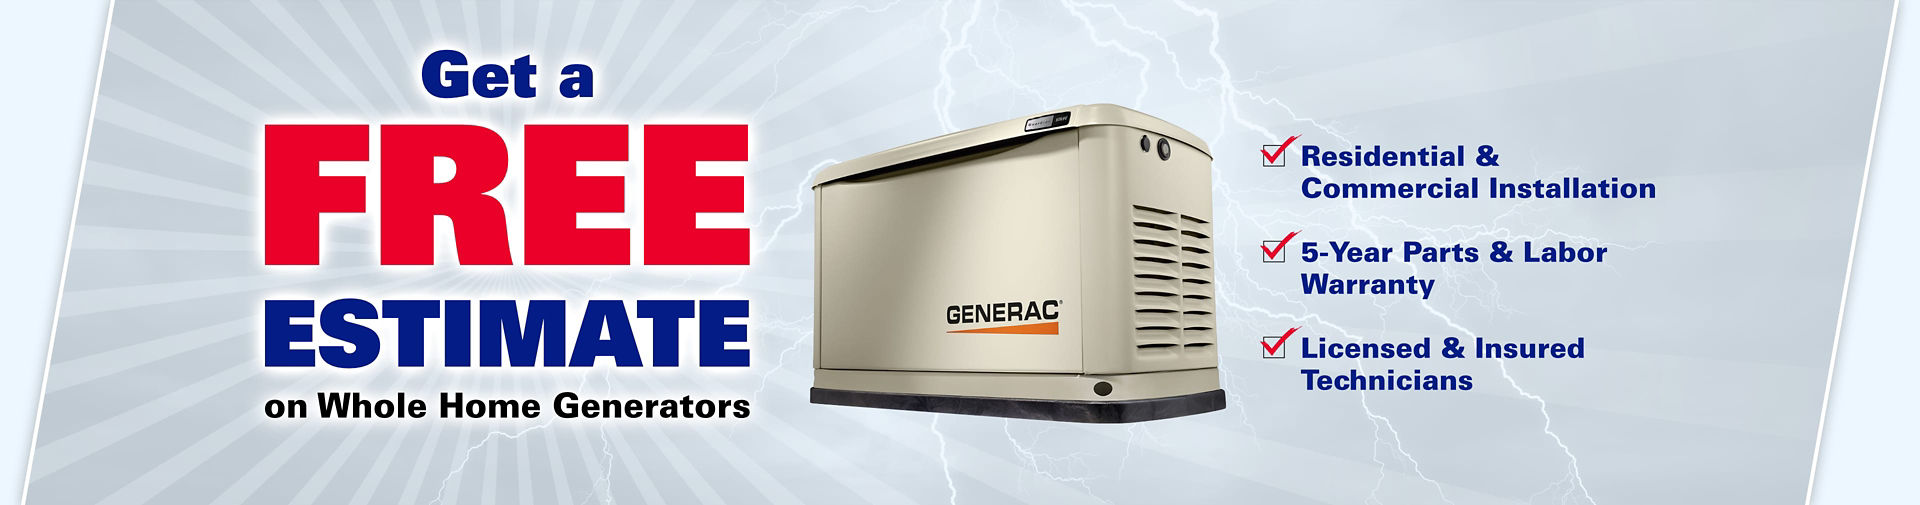 Get A FREE Estimate on Whole Home Generators